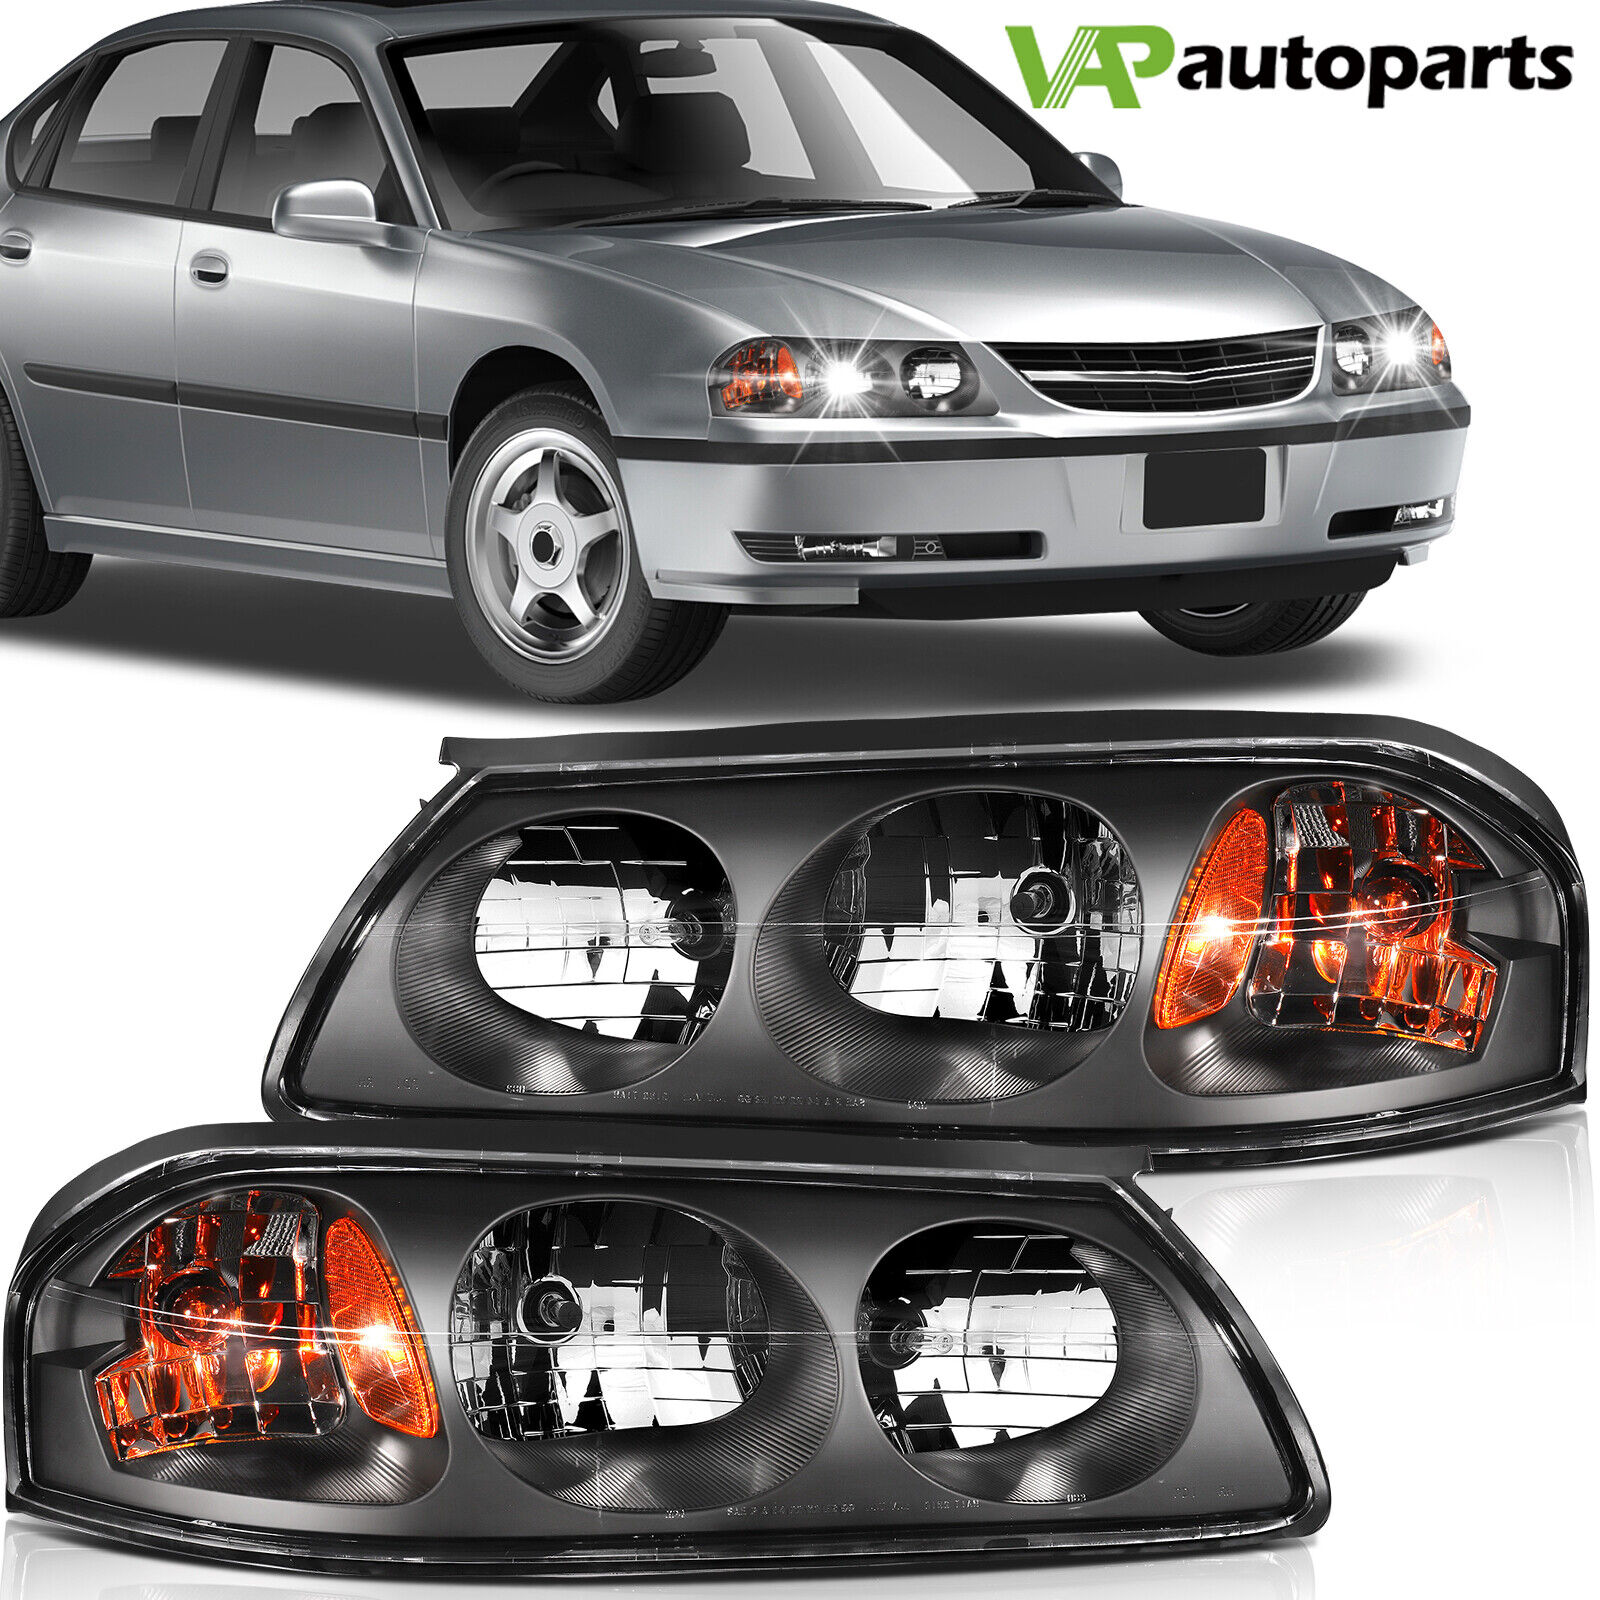 For Chevy Impala 2000-2005 Headlight Assembly Pair Replacement Driver  +Passenger | eBay